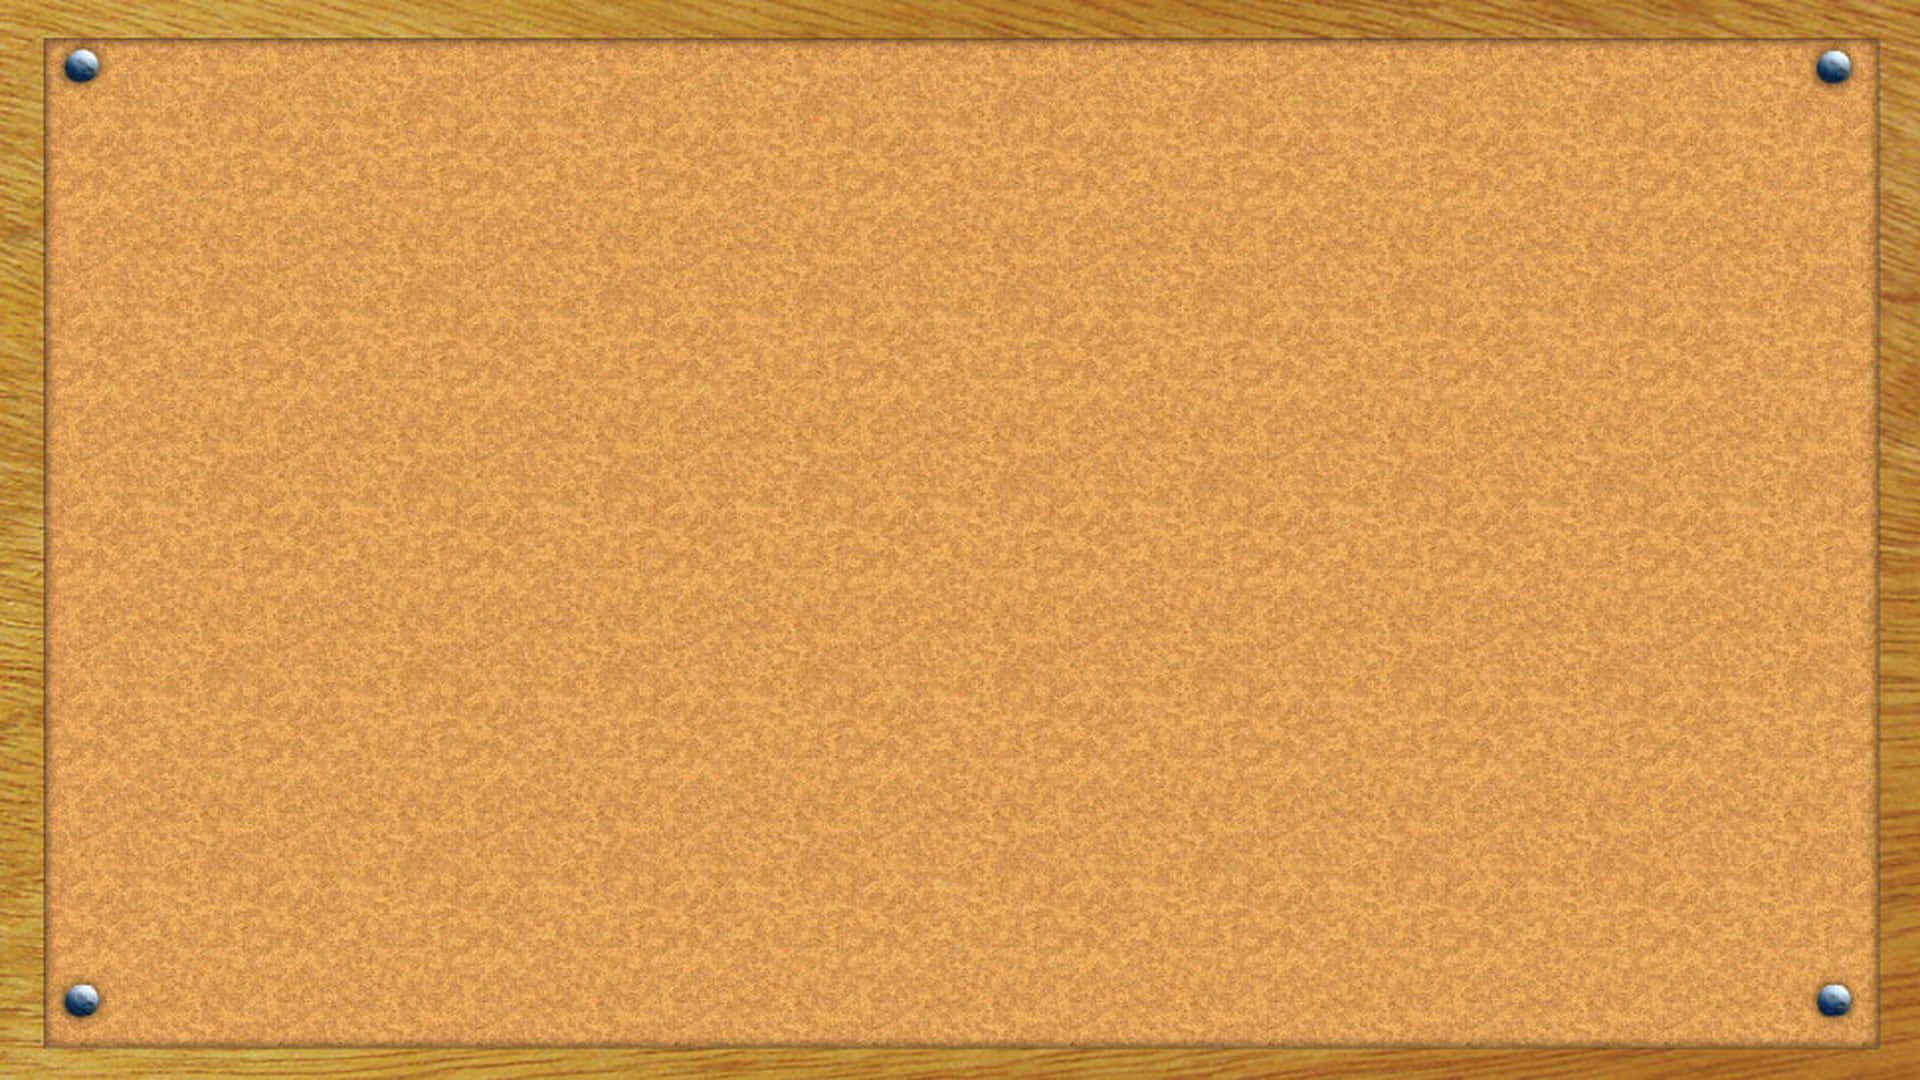 A Wooden Cork Board With A Brown Background